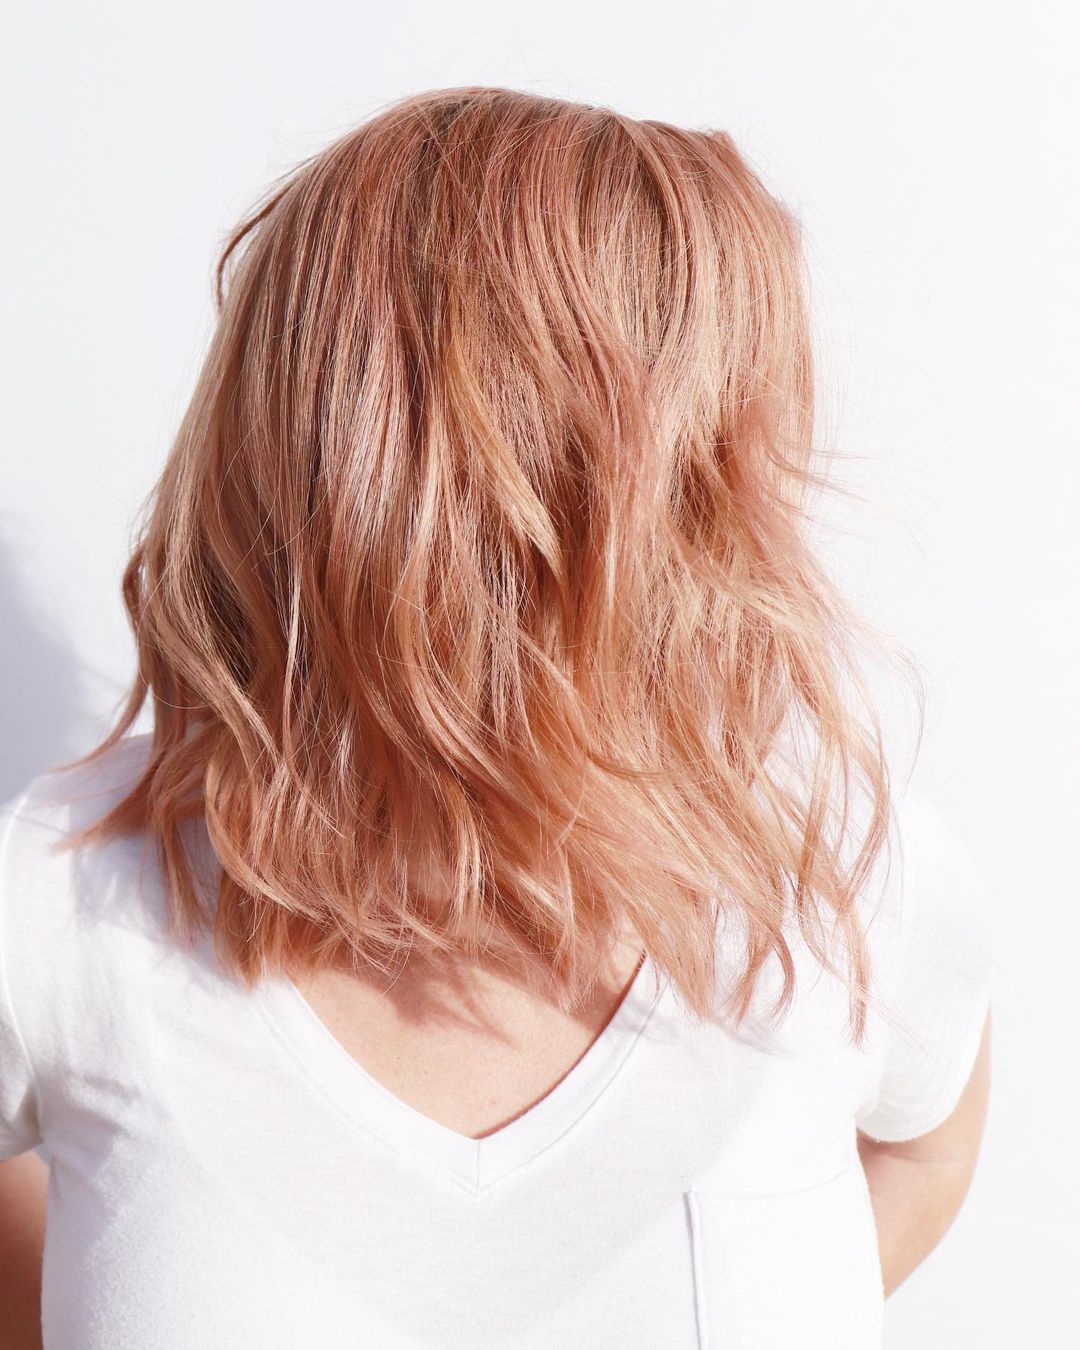 Chest-Length Copper Rose Gold Hair with Strawberry blond Layers